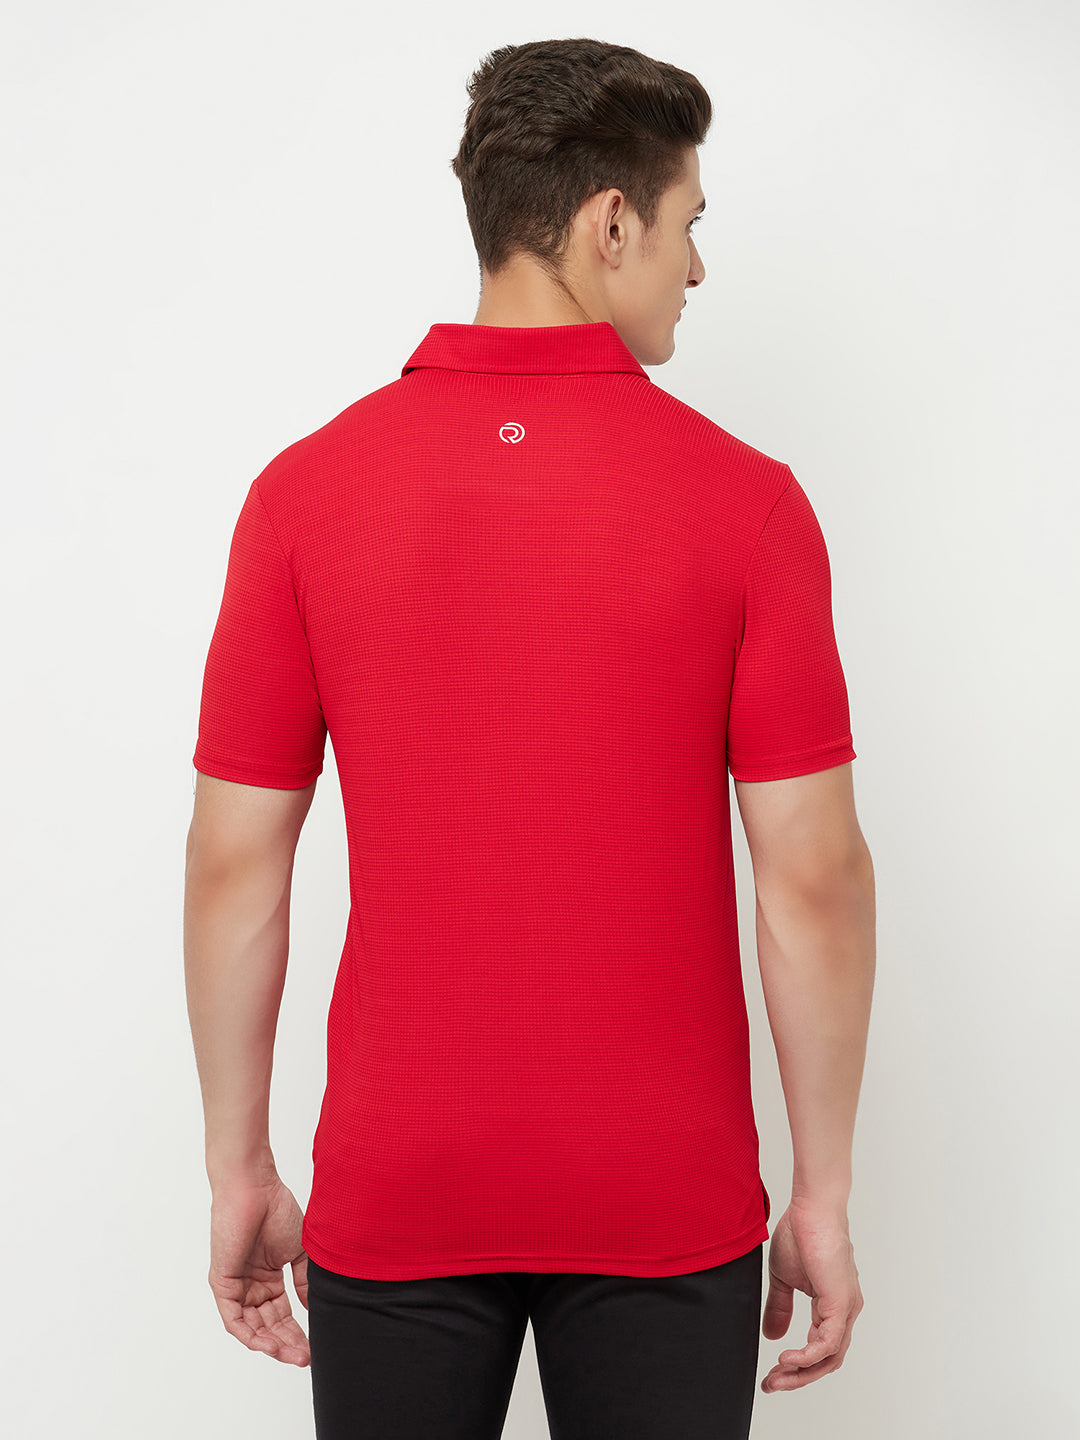 2 pc Combo - Track Black & Light Dry Fit Golf Tshirt - Red